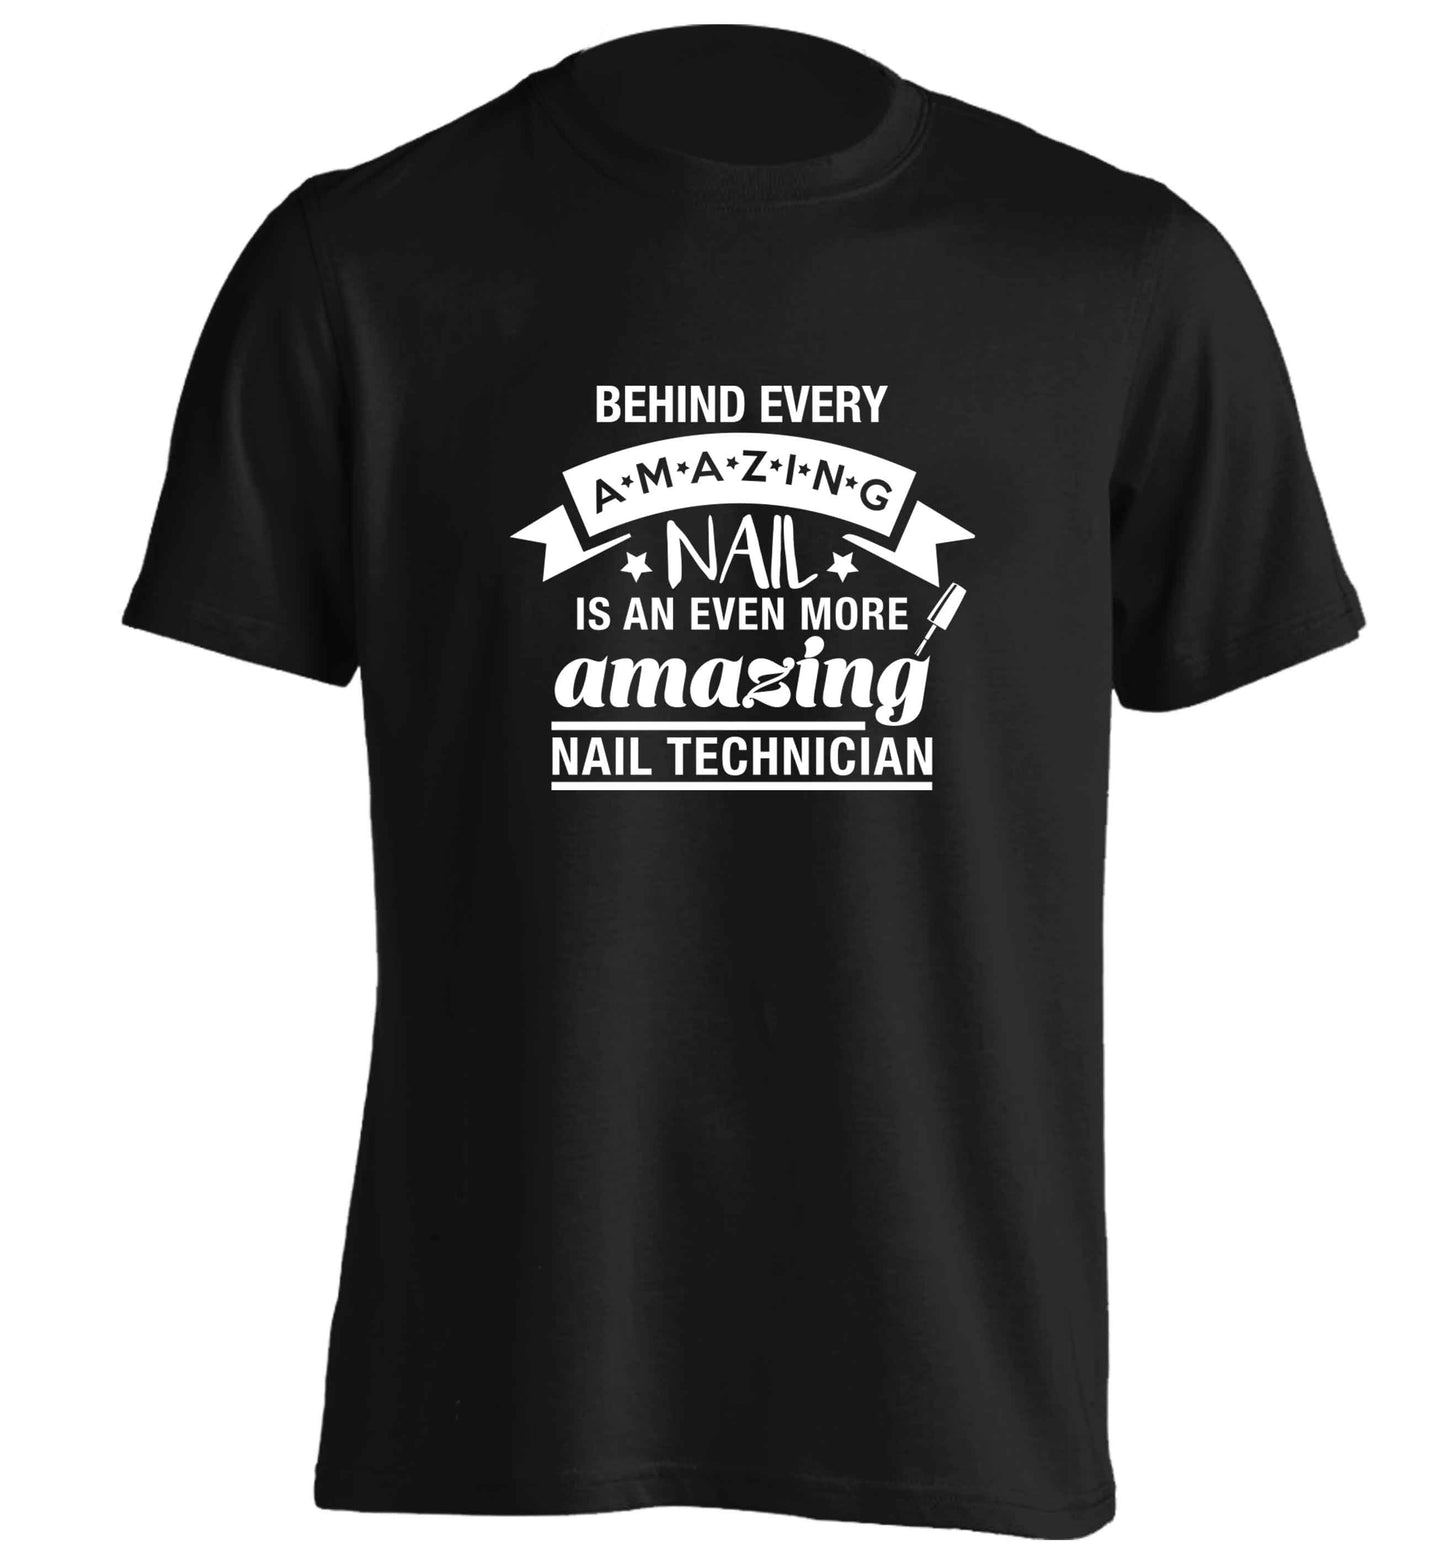 Behind every amazing nail is an even more amazing nail technician adults unisex black Tshirt 2XL